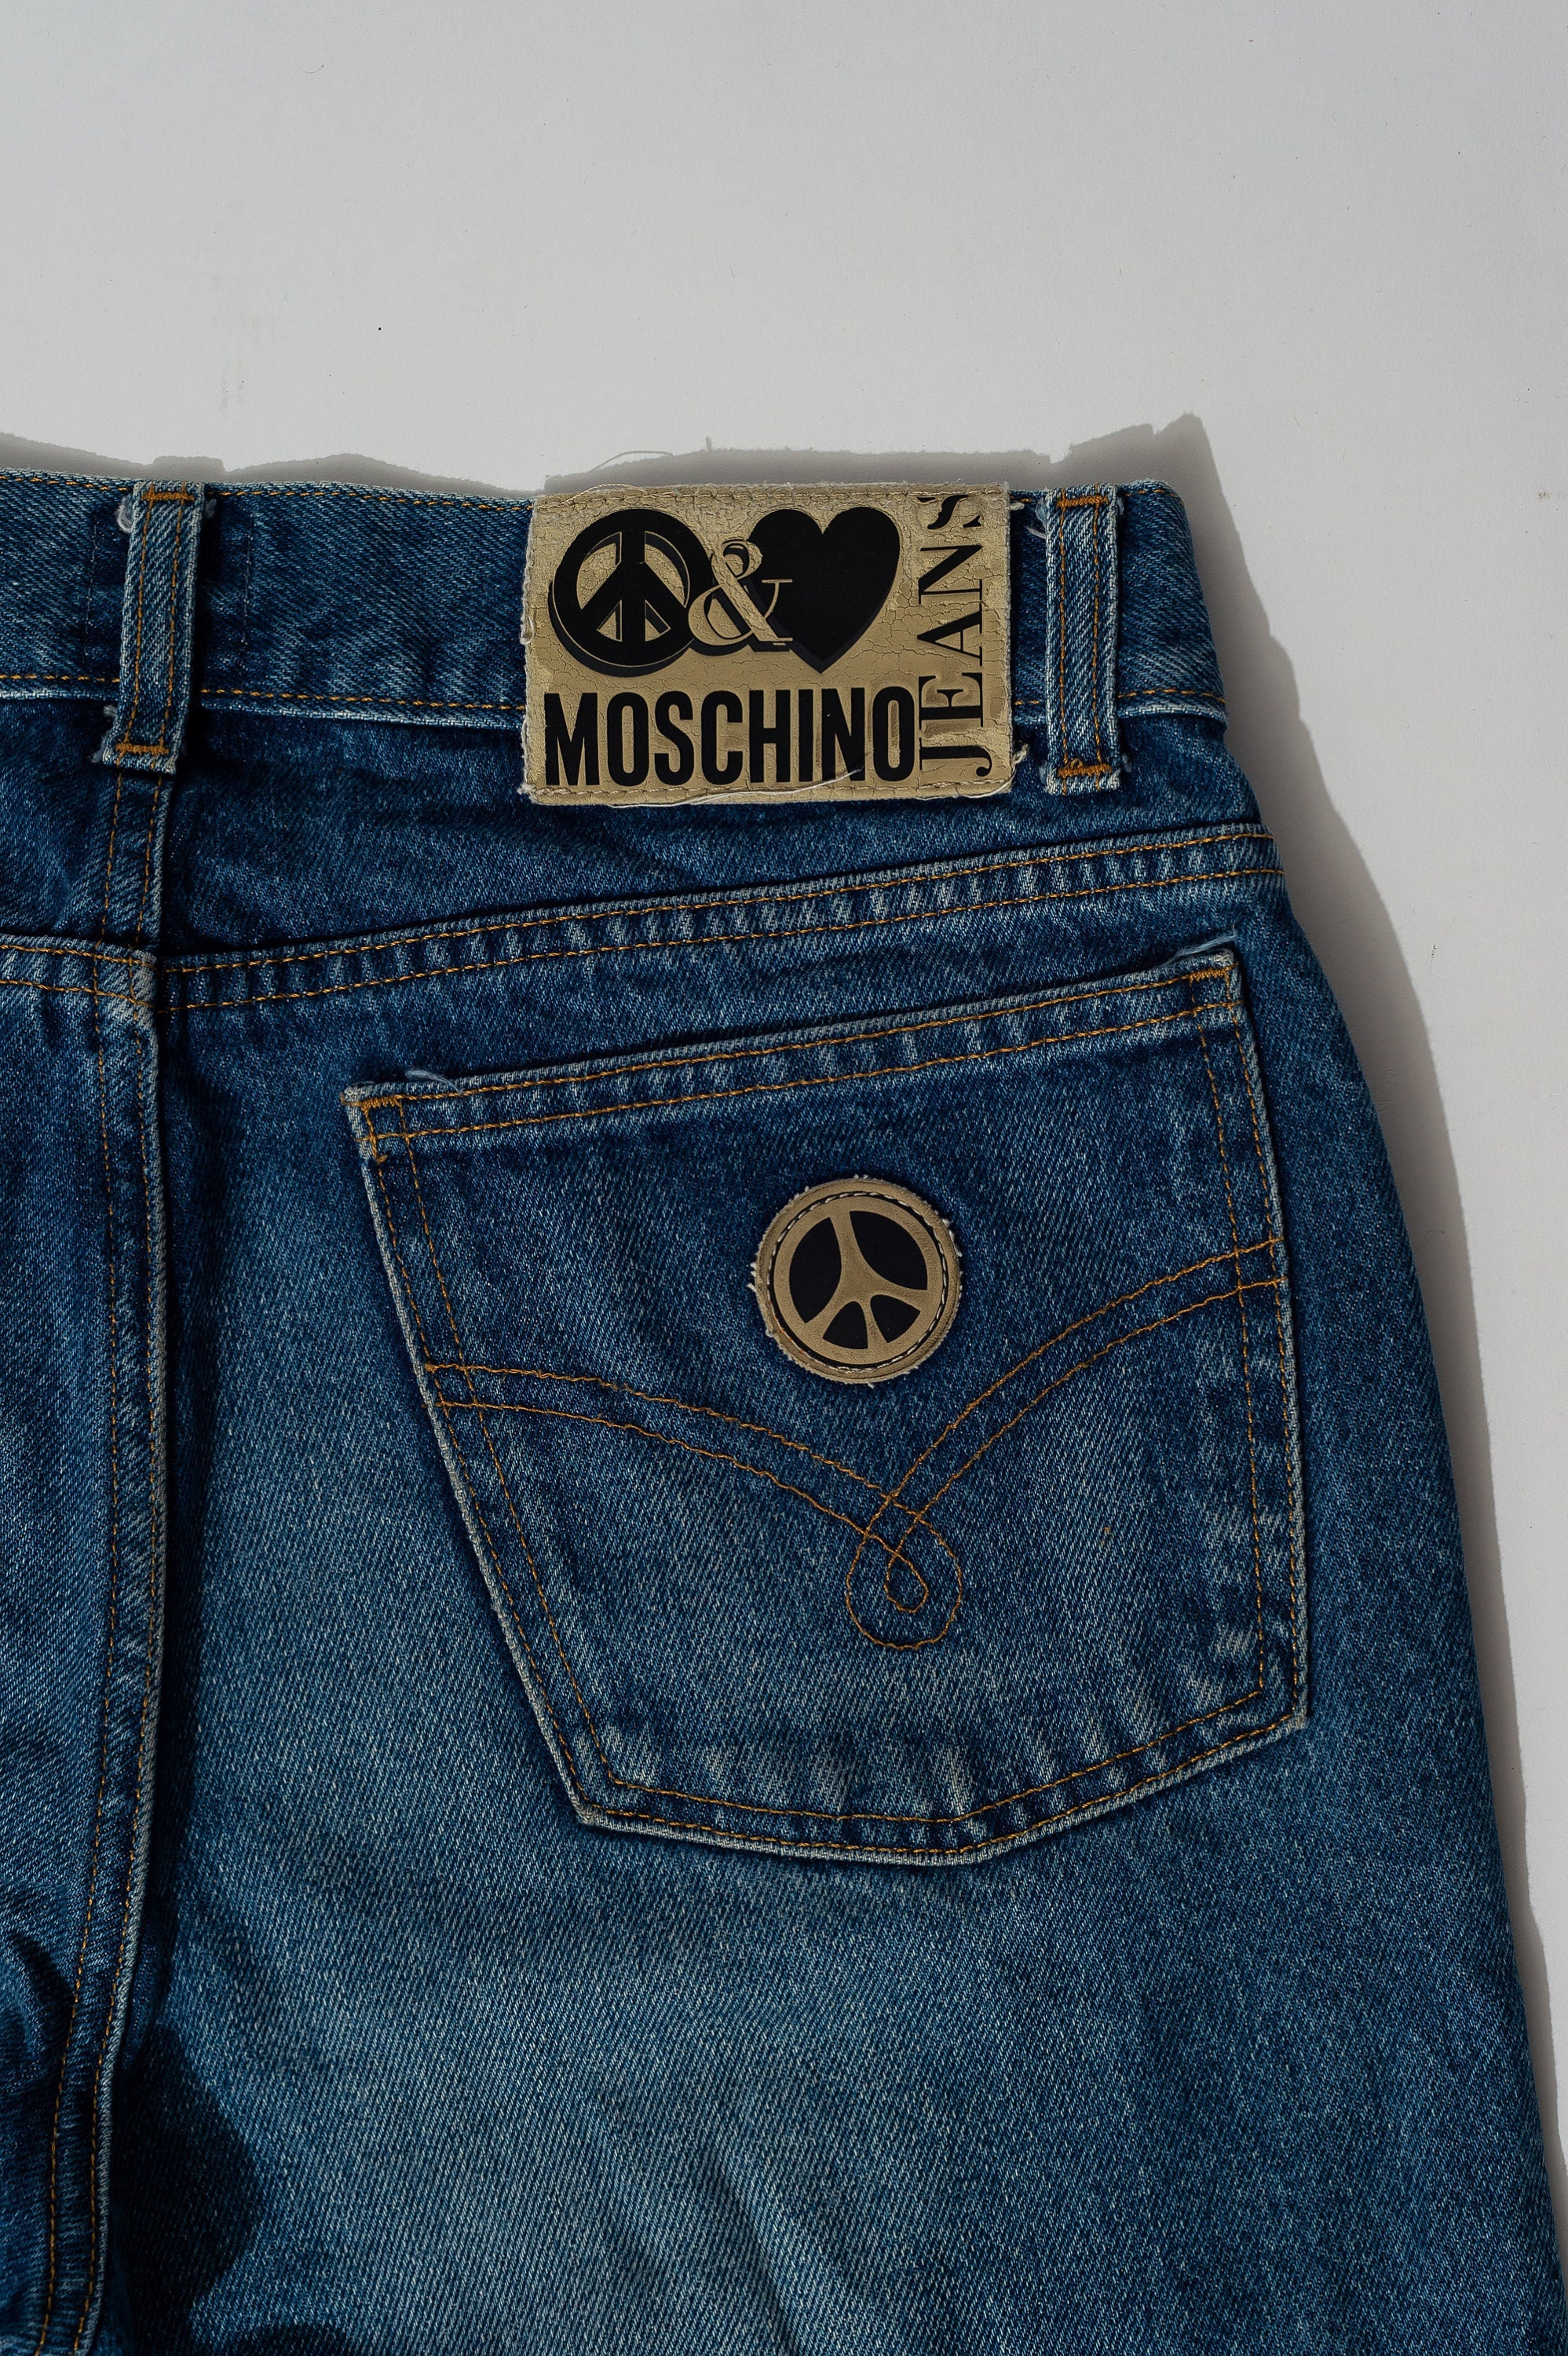 Vintage Moschino Jeans 